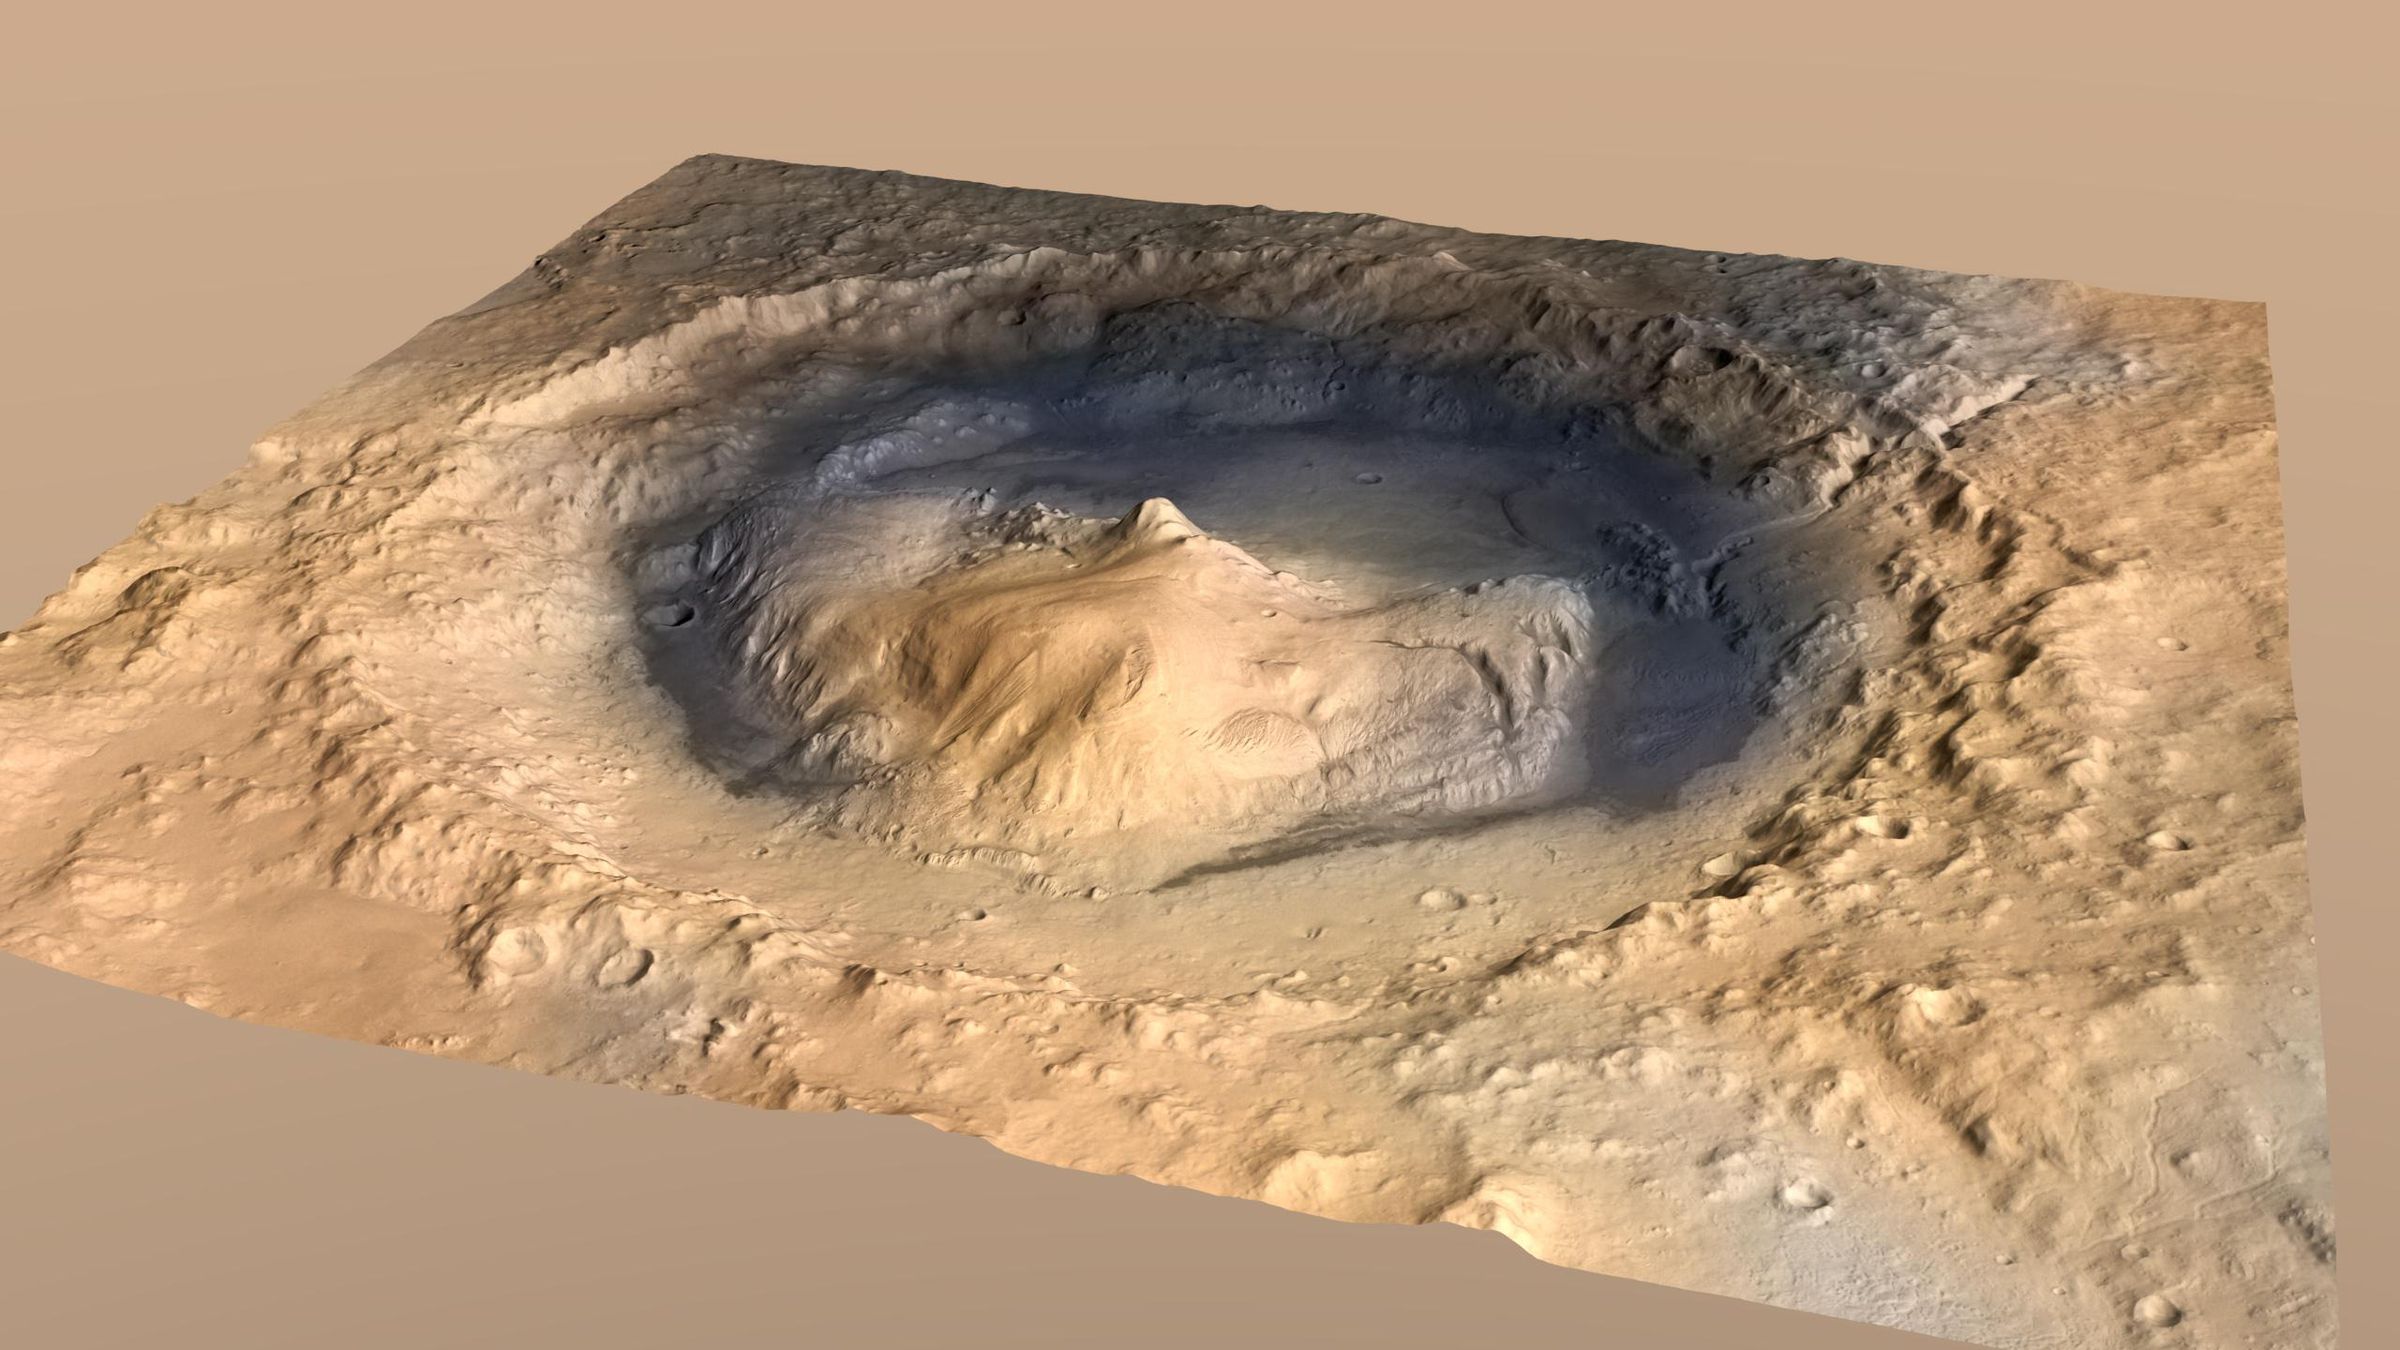 Gale Crater, where NASA’s Curiosity rover landed in 2012, contains a mountain called Mount Sharp rising from the crater floor.